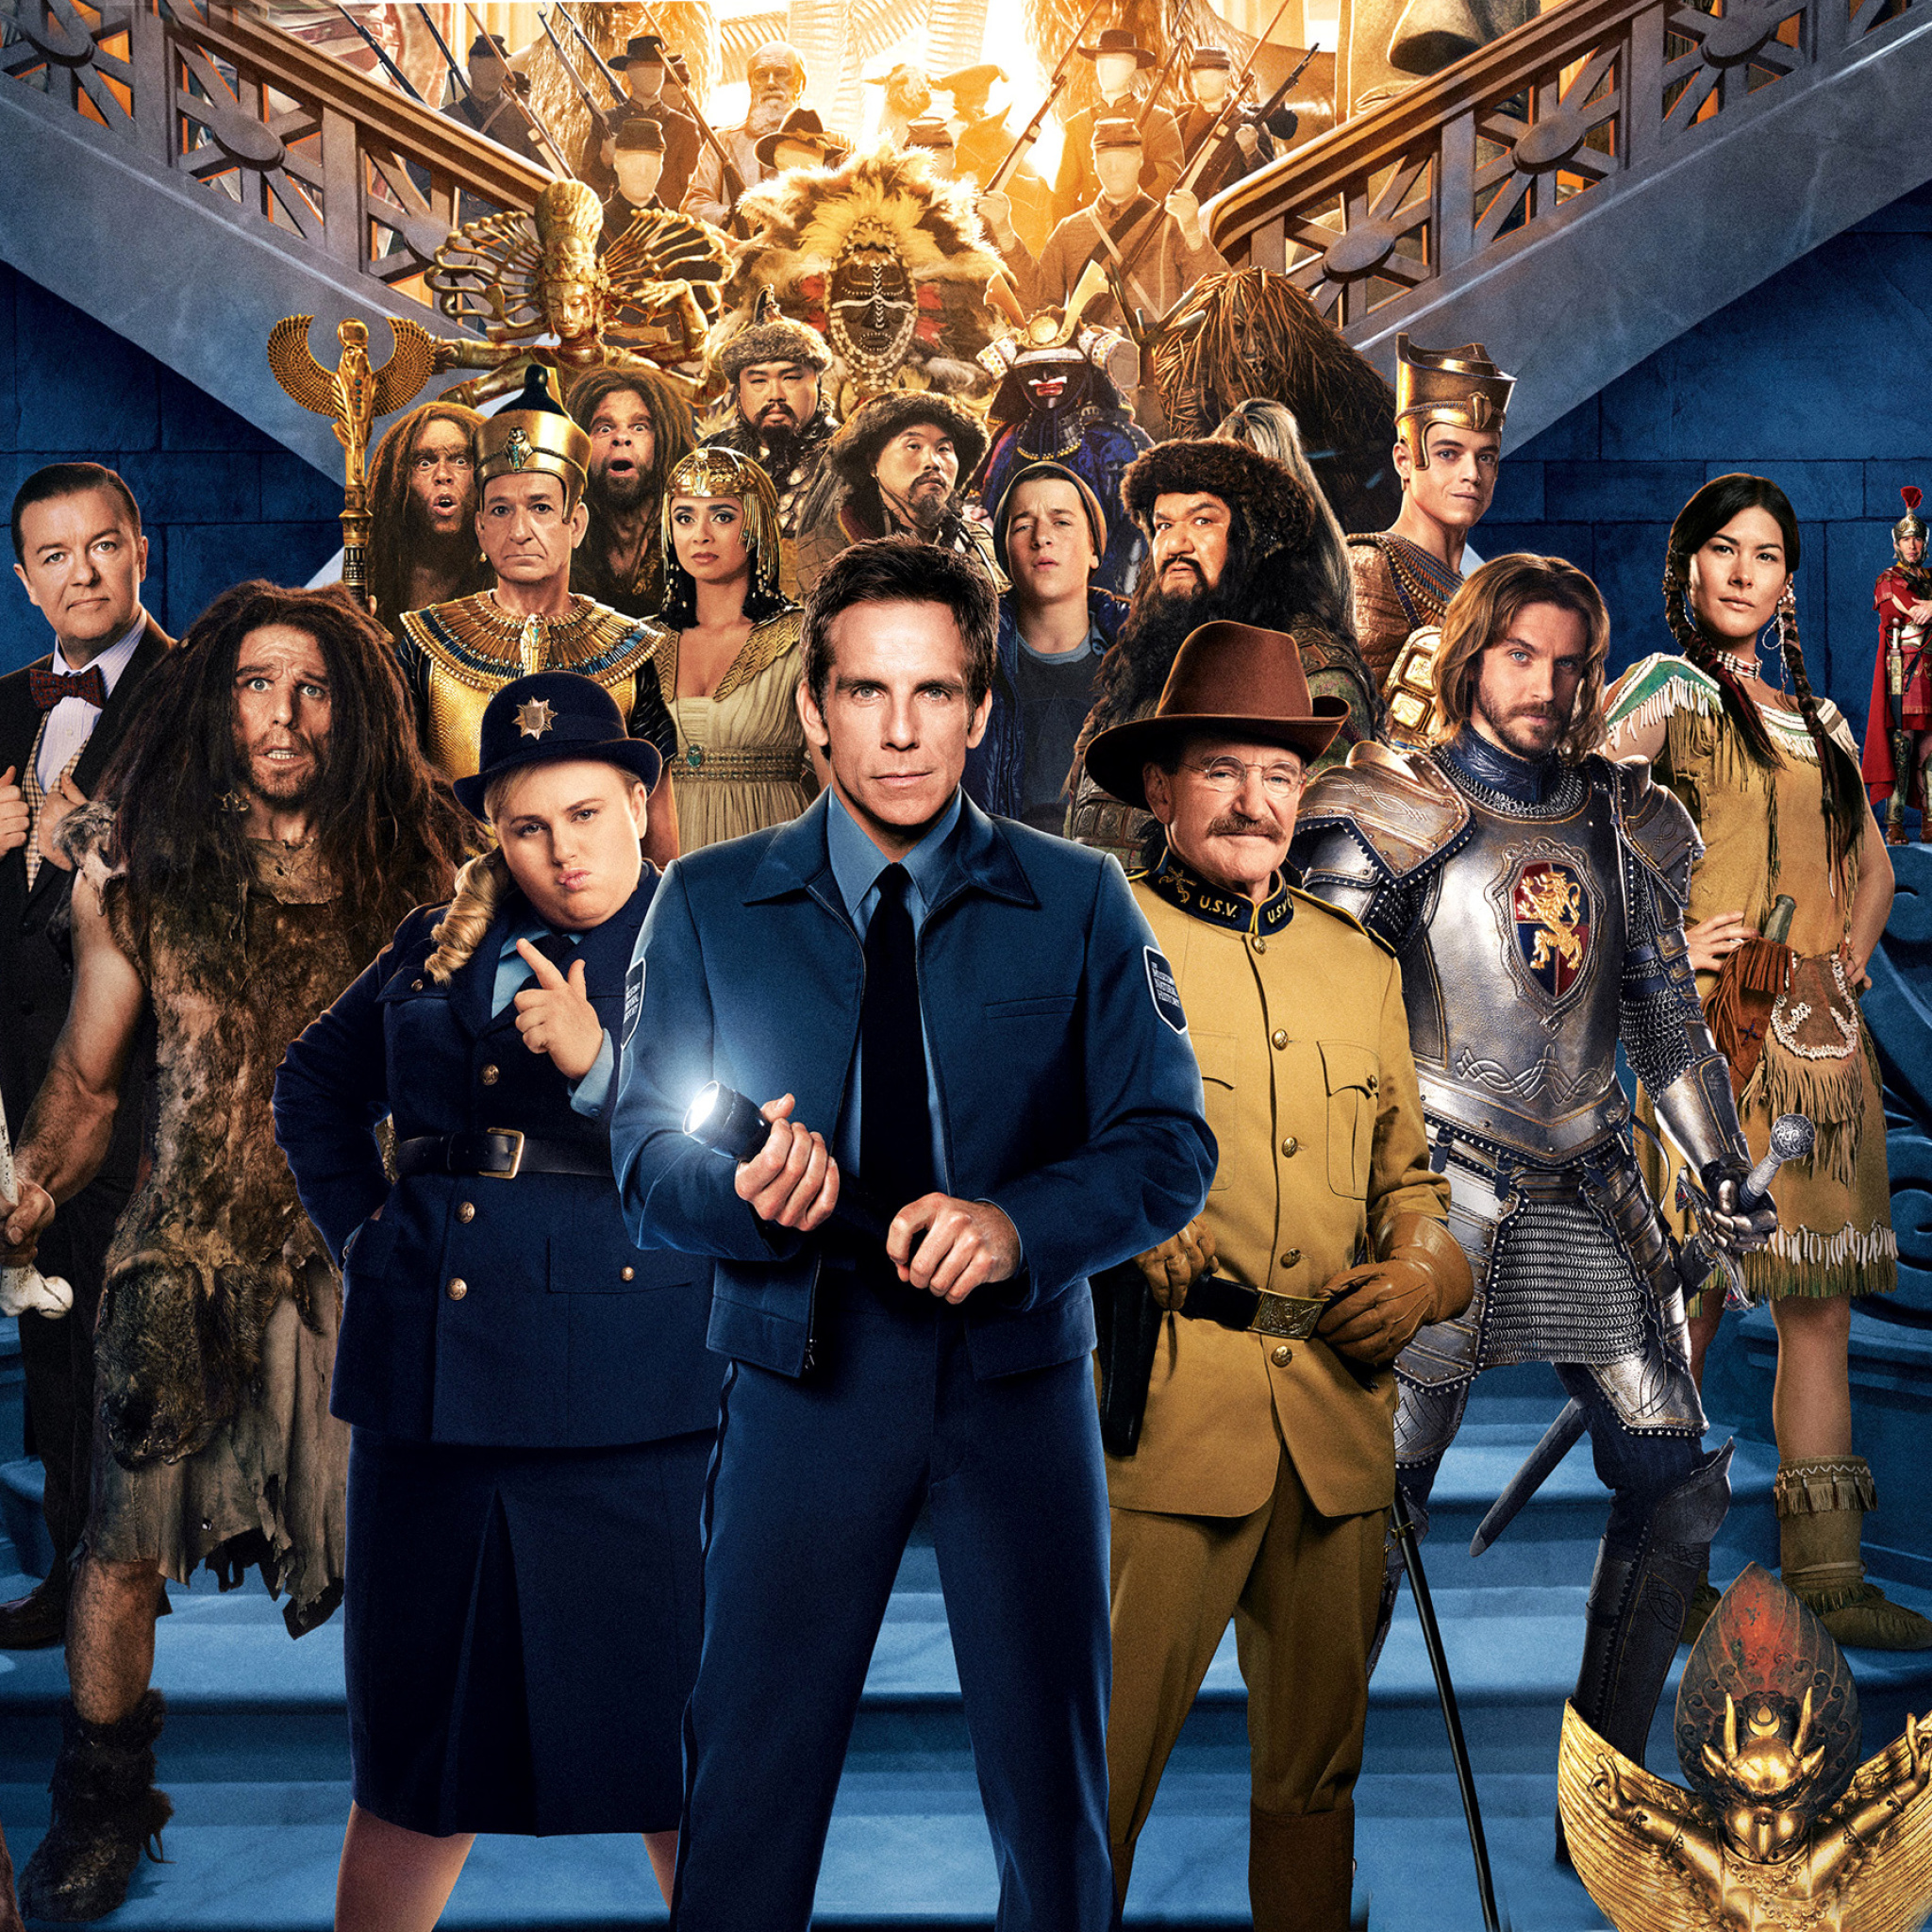 Das Night at the Museum Secret of the Tomb 2014 Wallpaper 2048x2048